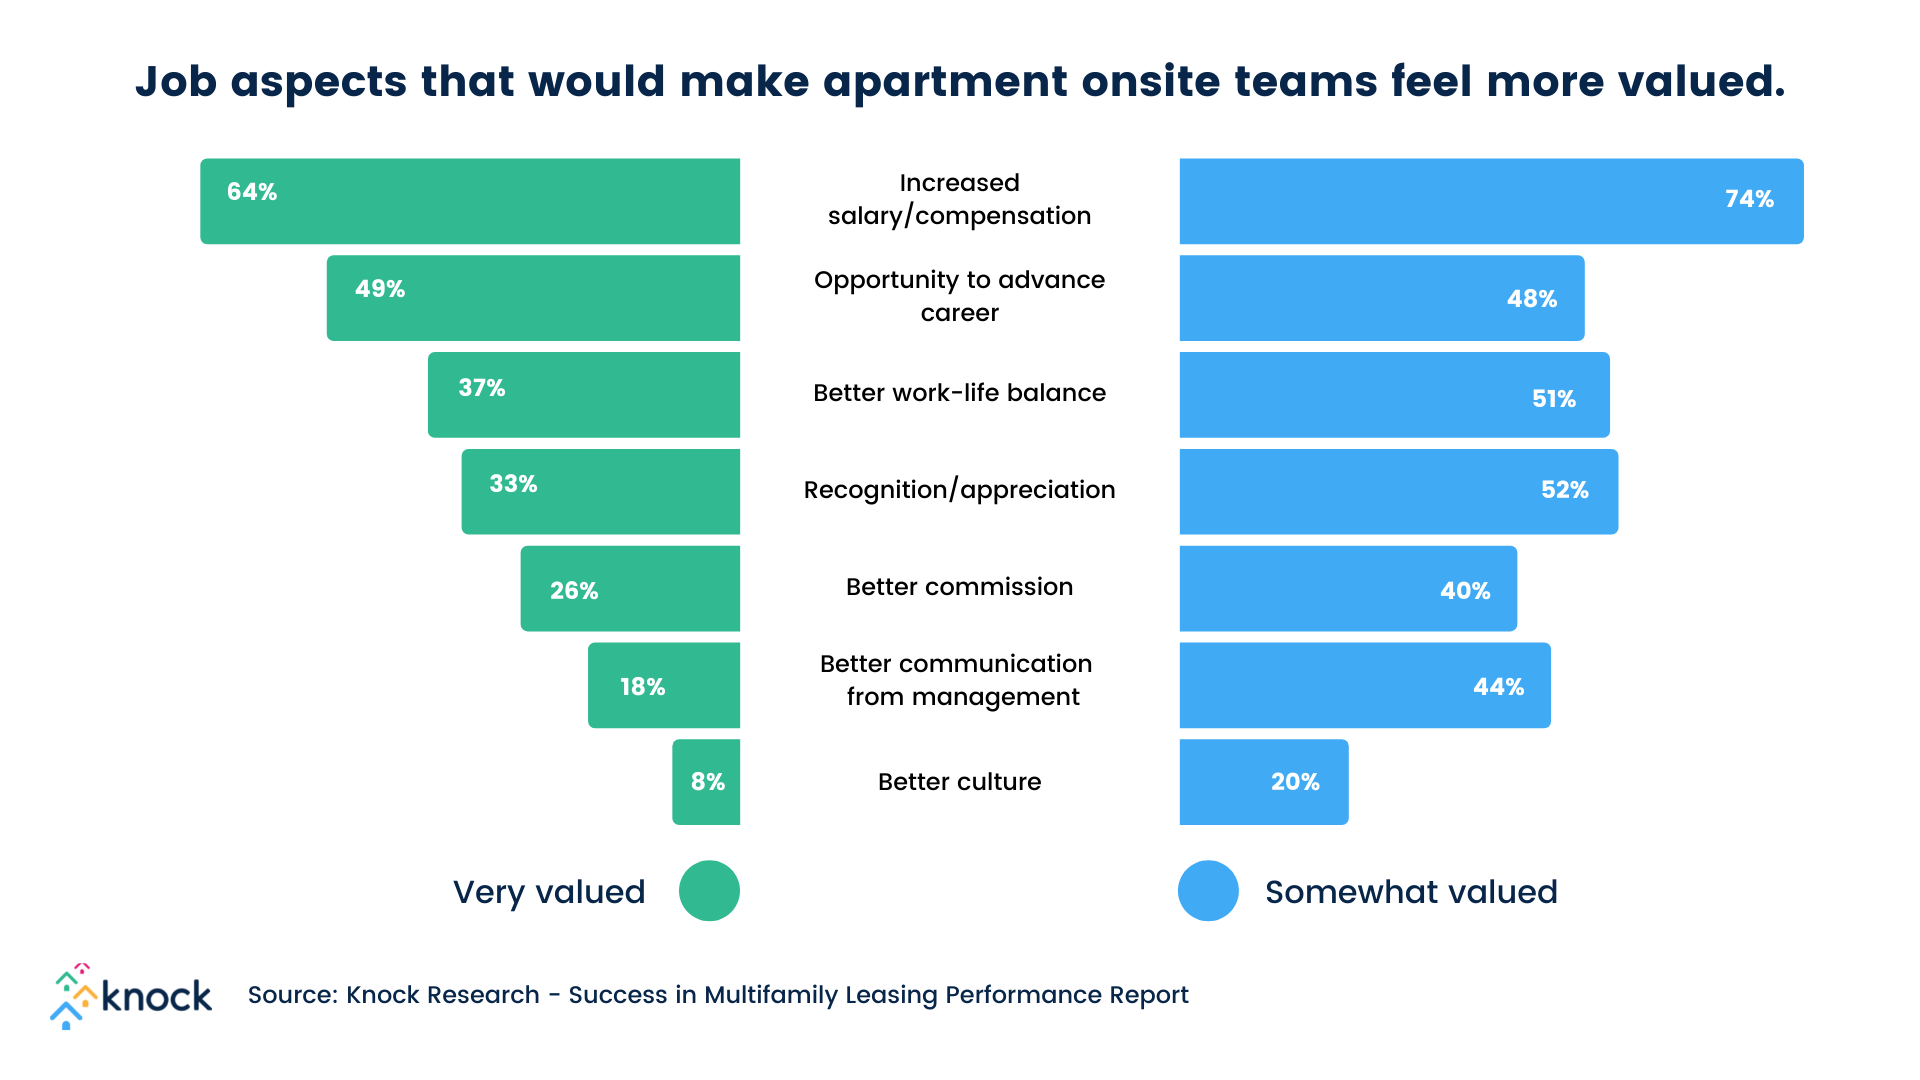 Knock's report shows: increased salary and compensation would make onsite teams feel more valued